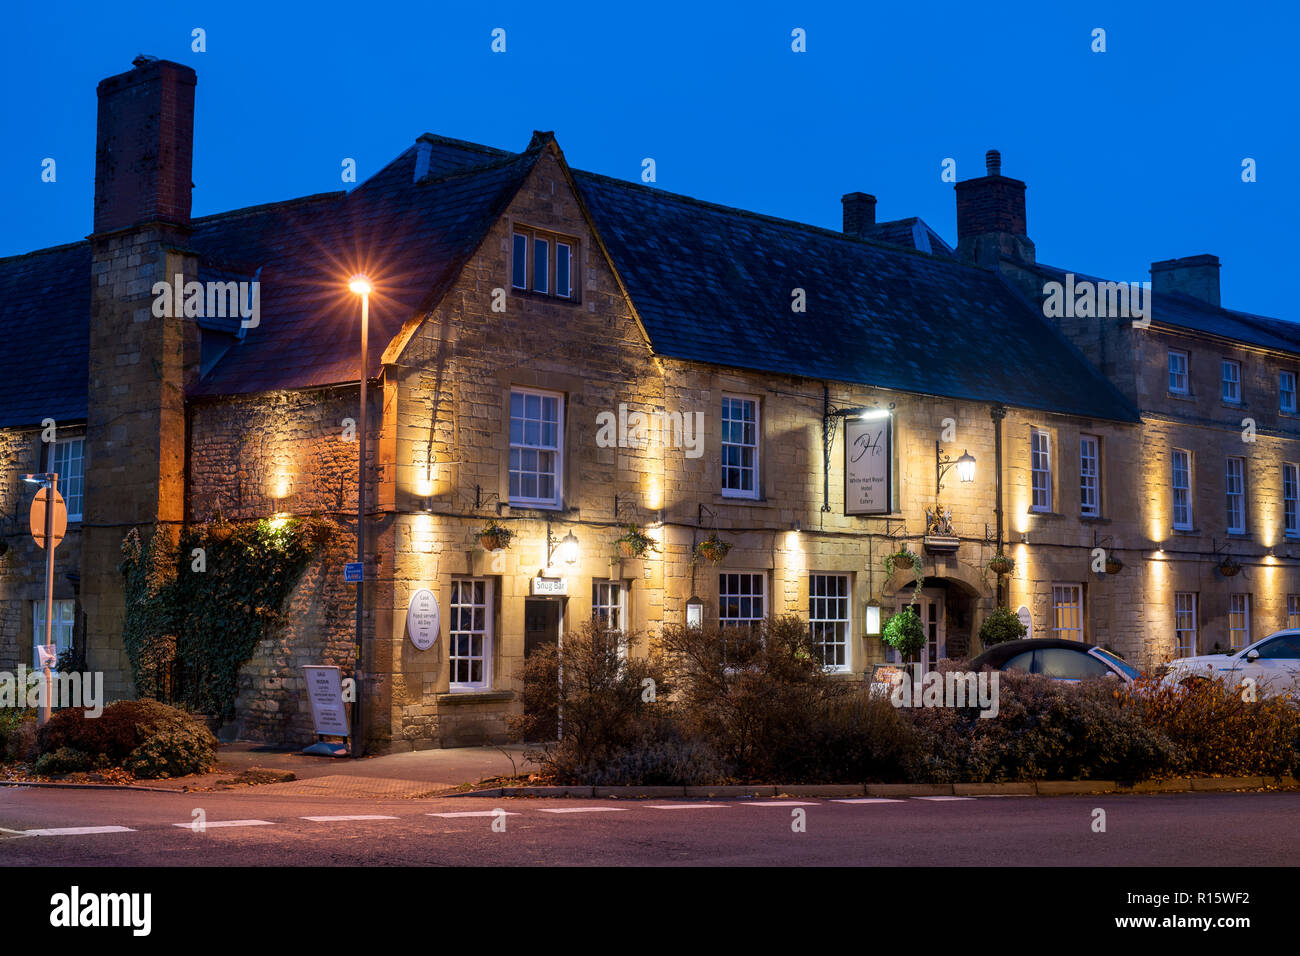 The White Hart Royal Hotel in the early morning before dawn. Moreton in Marsh, Cotswolds, Gloucestershire. UK Stock Photo